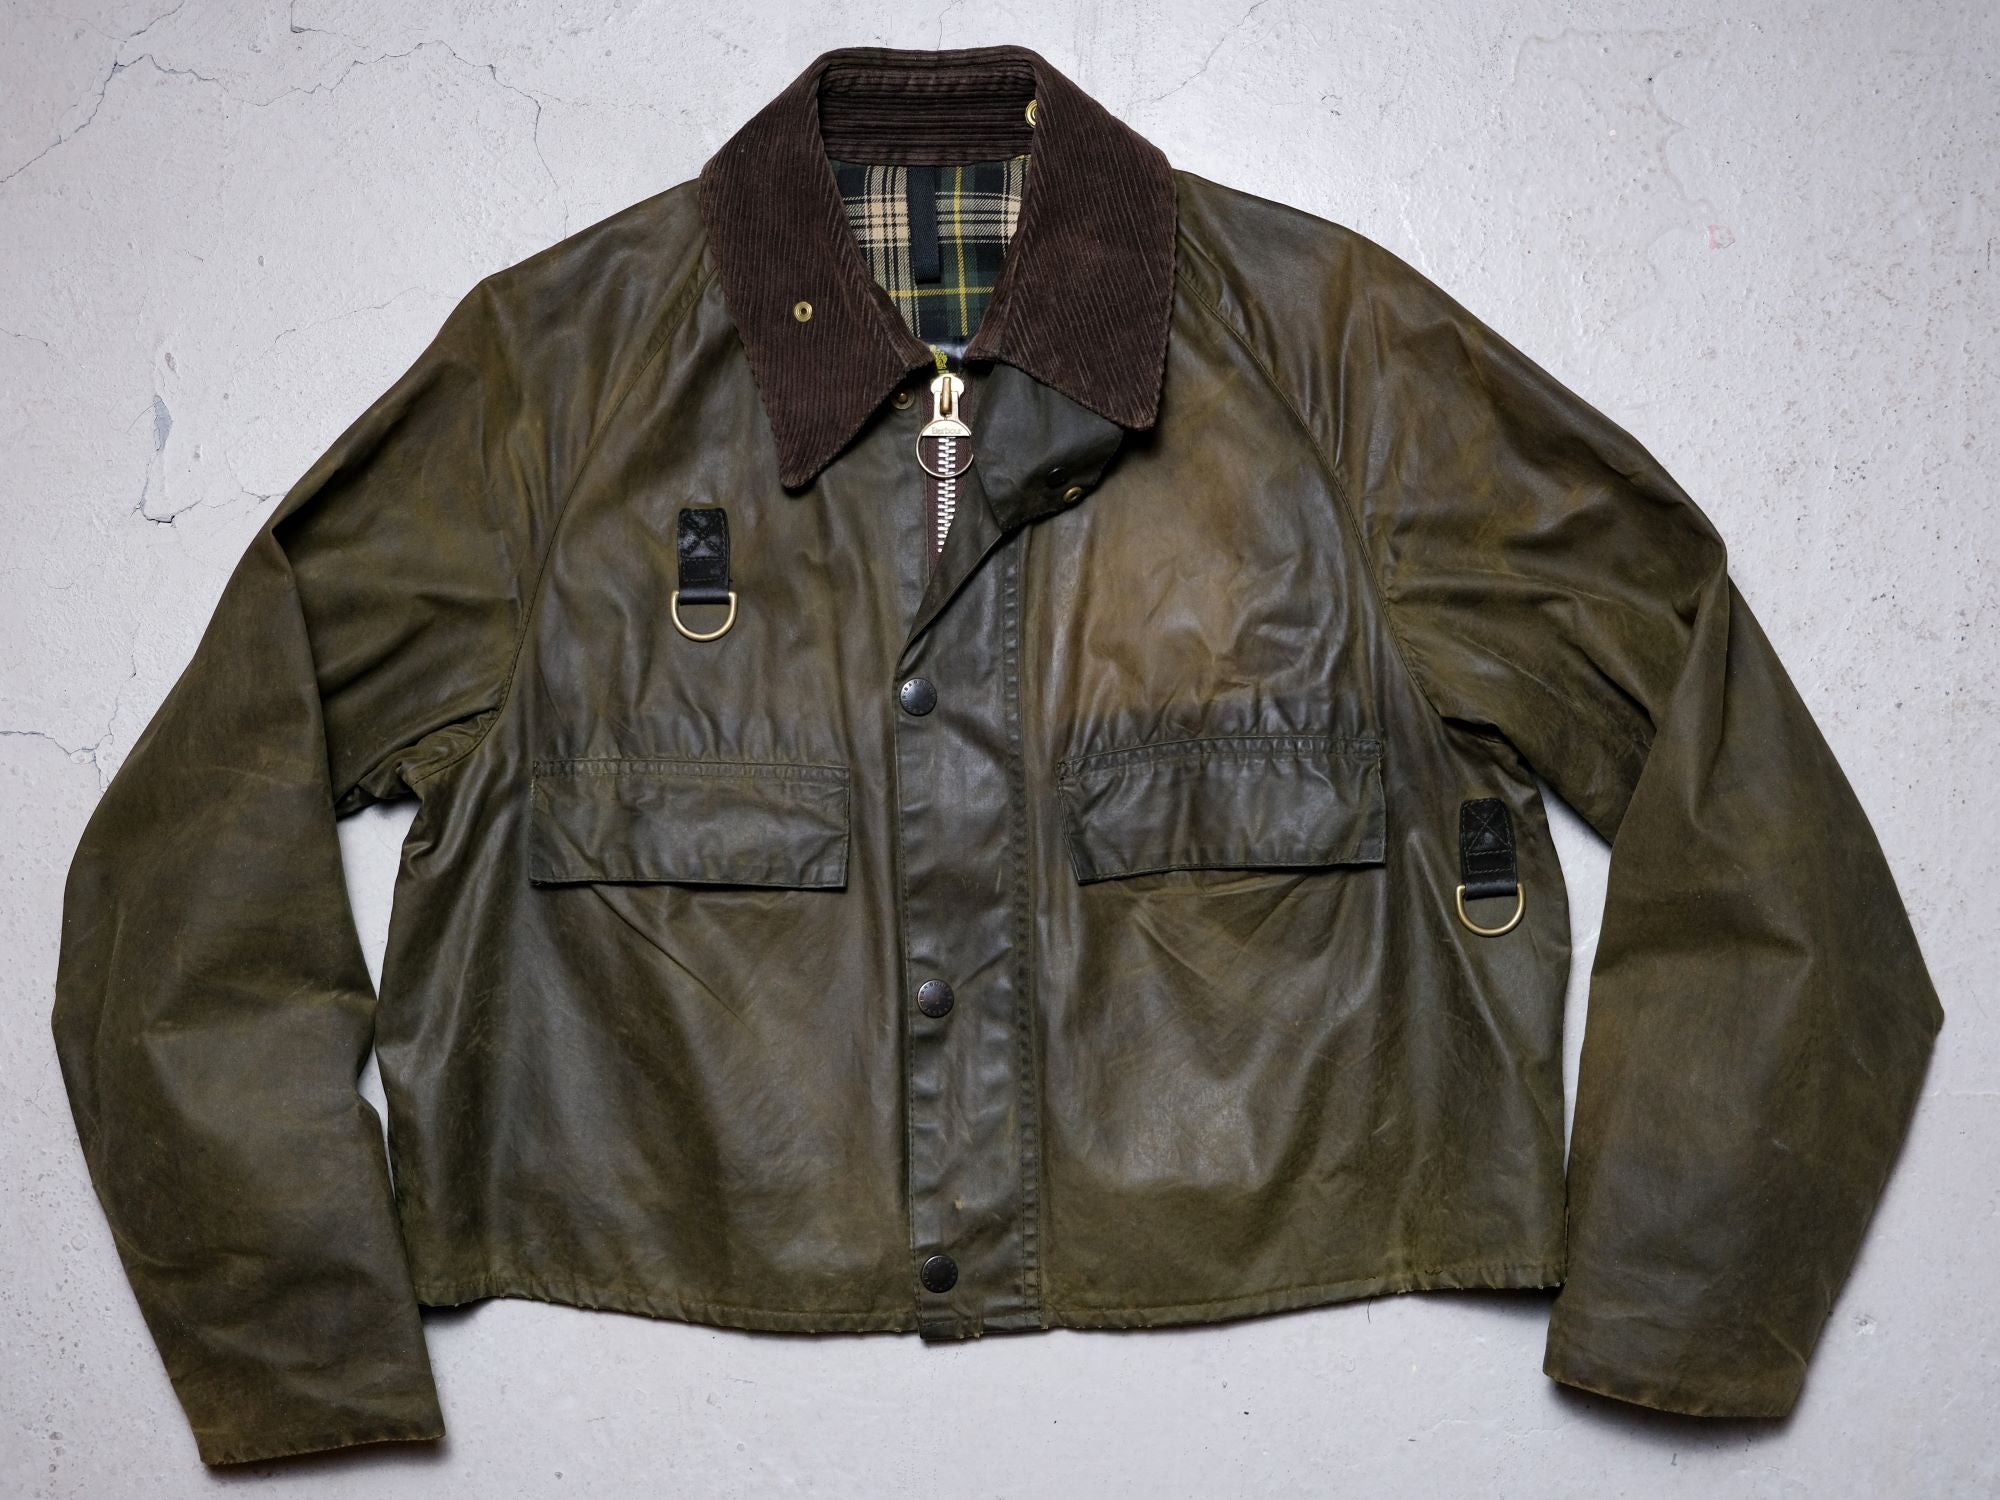 Sold 已售出）1992 Barbour 3 crest A130 “ Spey ” waxed fishing